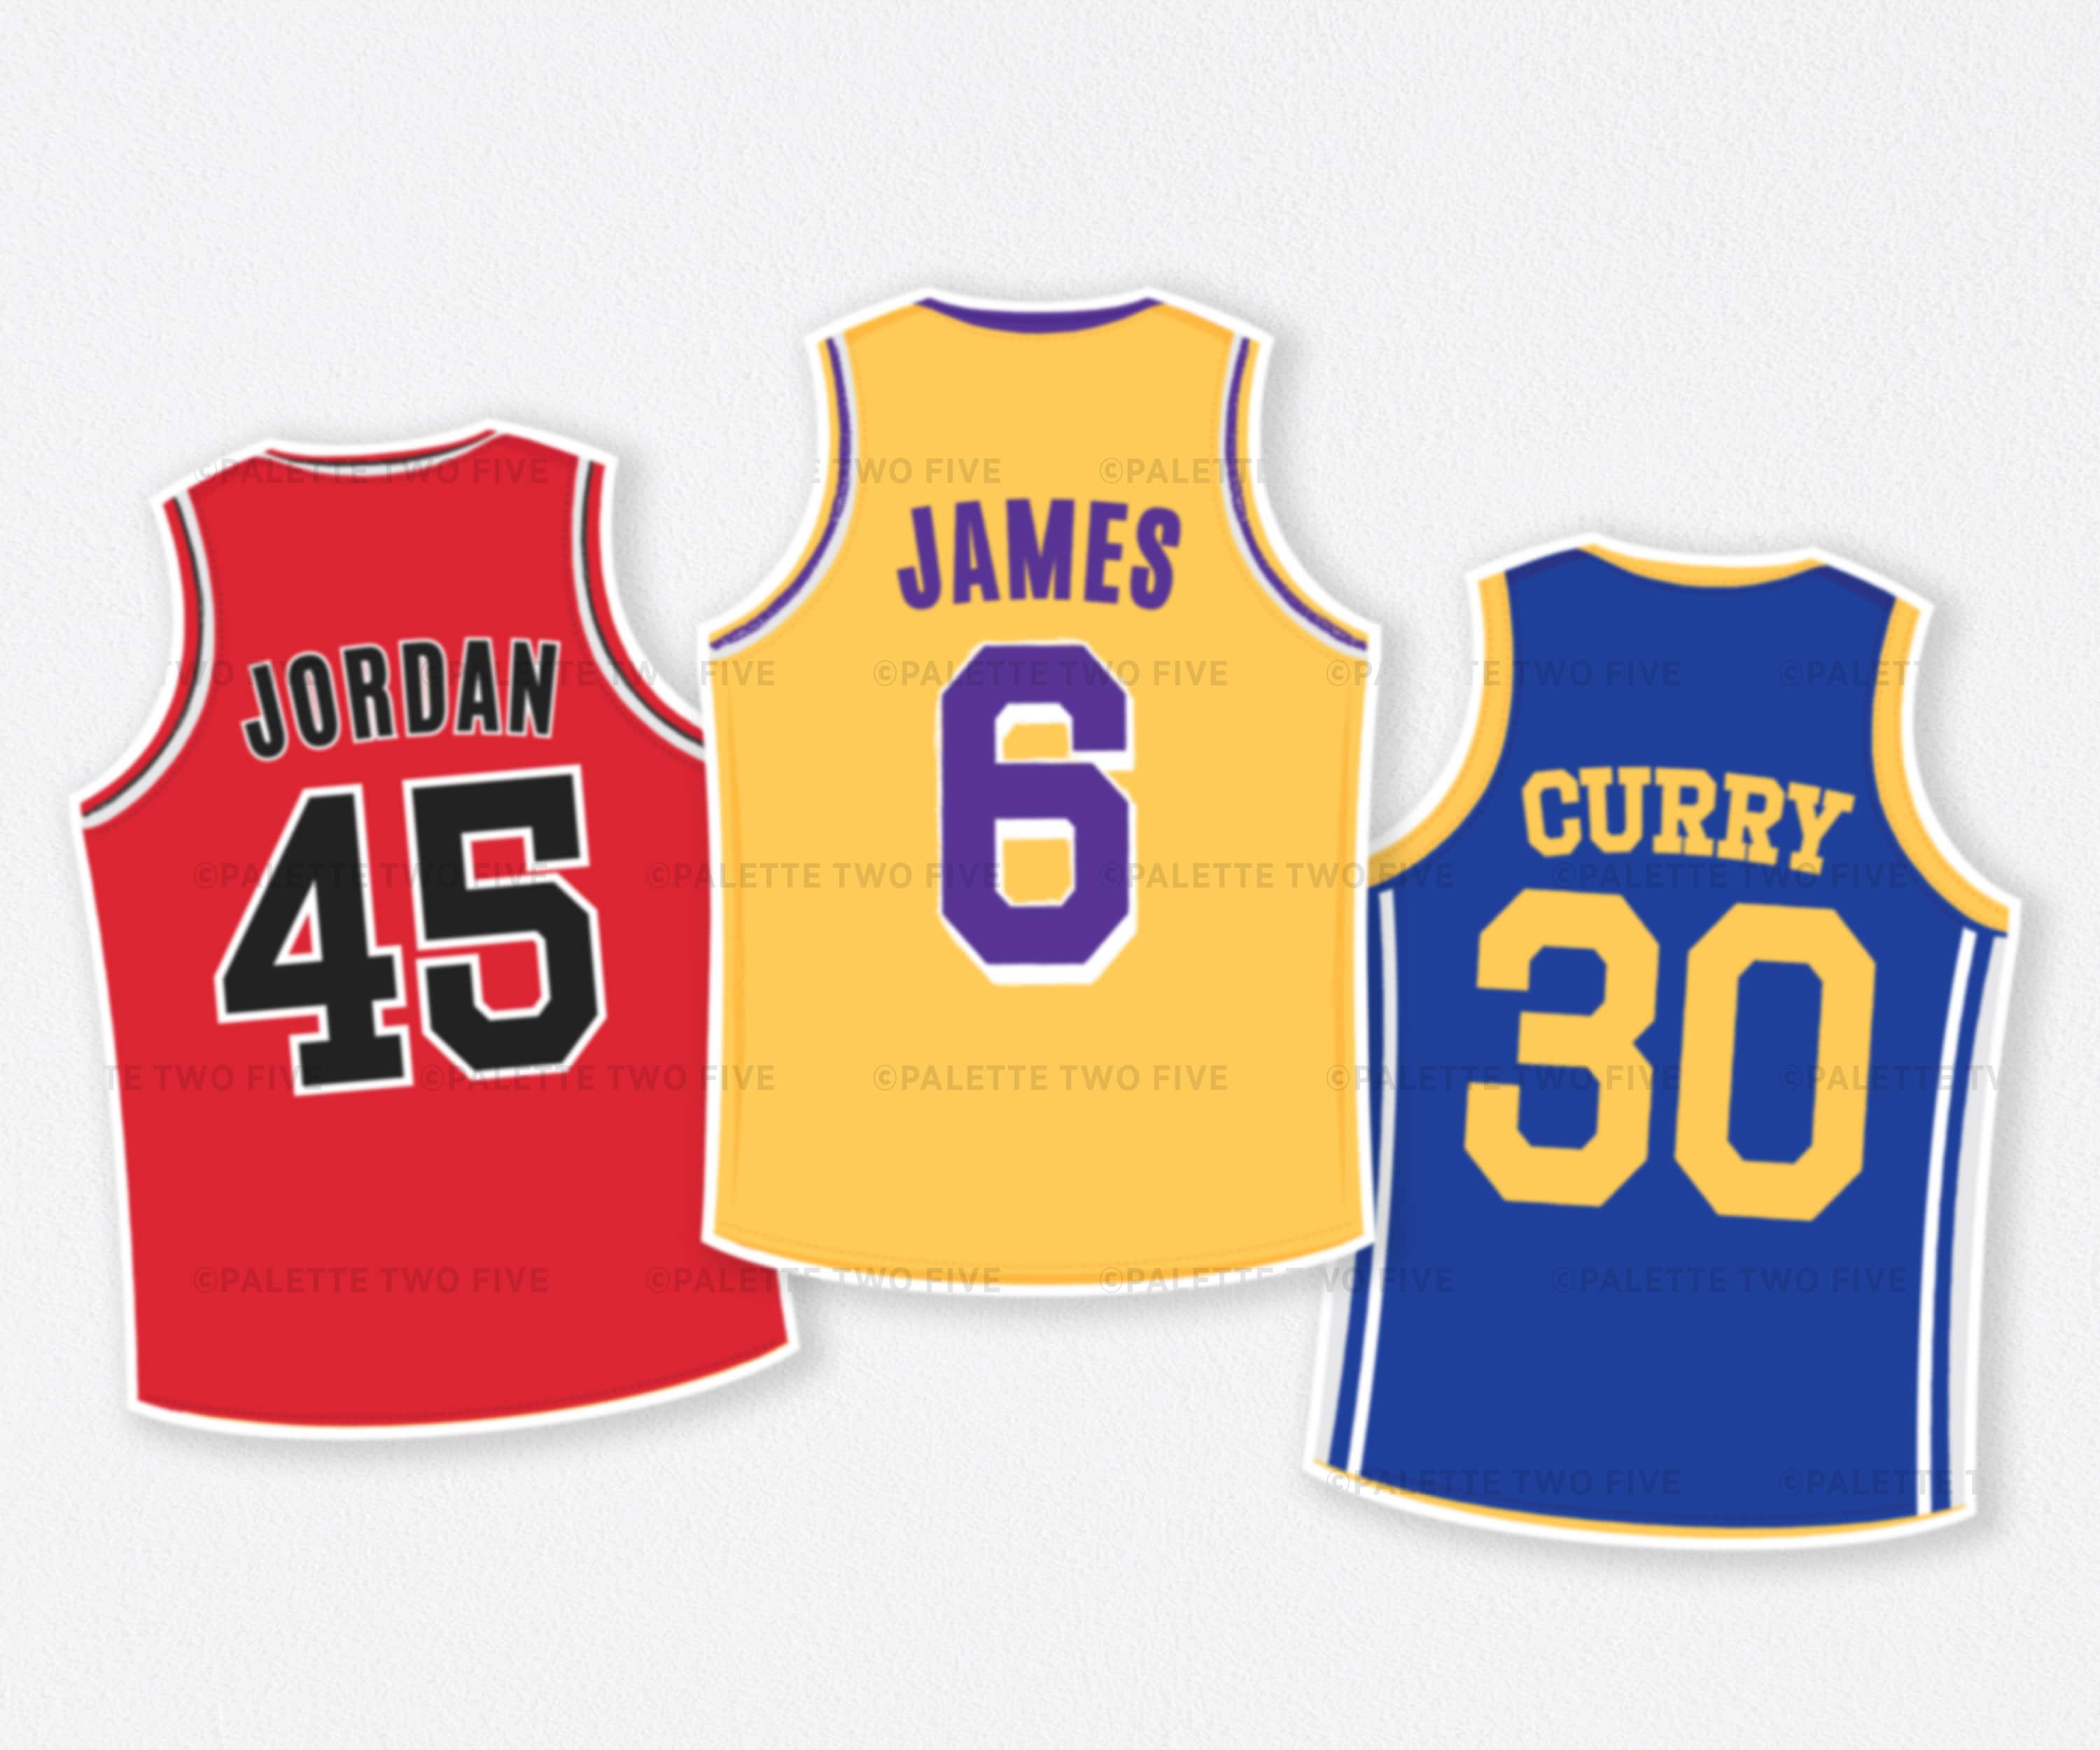 GOLDEN STATE WARRIORS CURRY WHITE HG JERSEY FULL SUBLIMATION